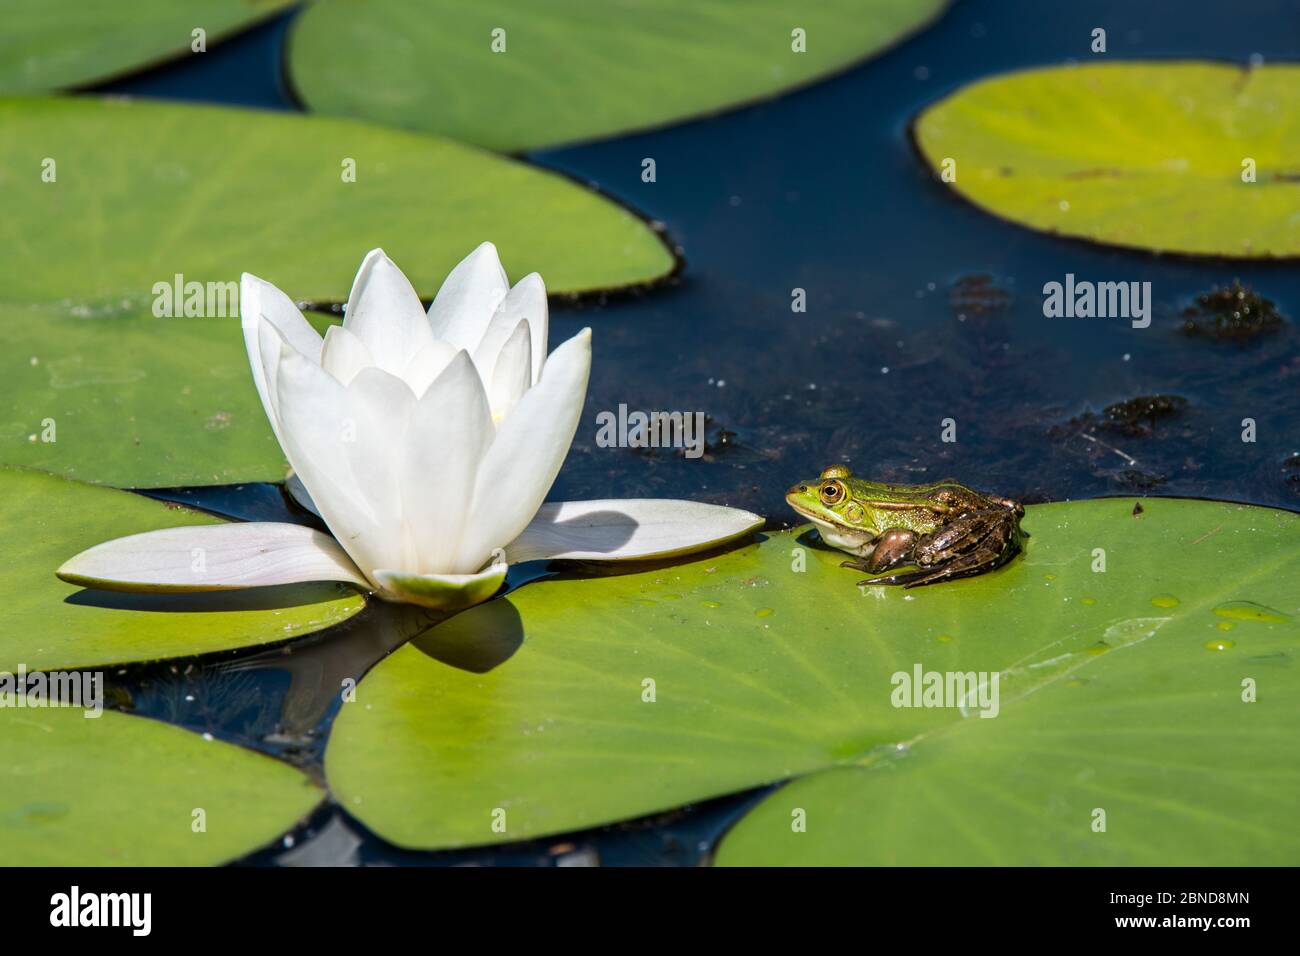 Edible frog / common water frog / green frog (Pelophylax vesculentus) resting on leaf of European white waterlily (Nymphaea alba) in pond, La Brenne, Stock Photo